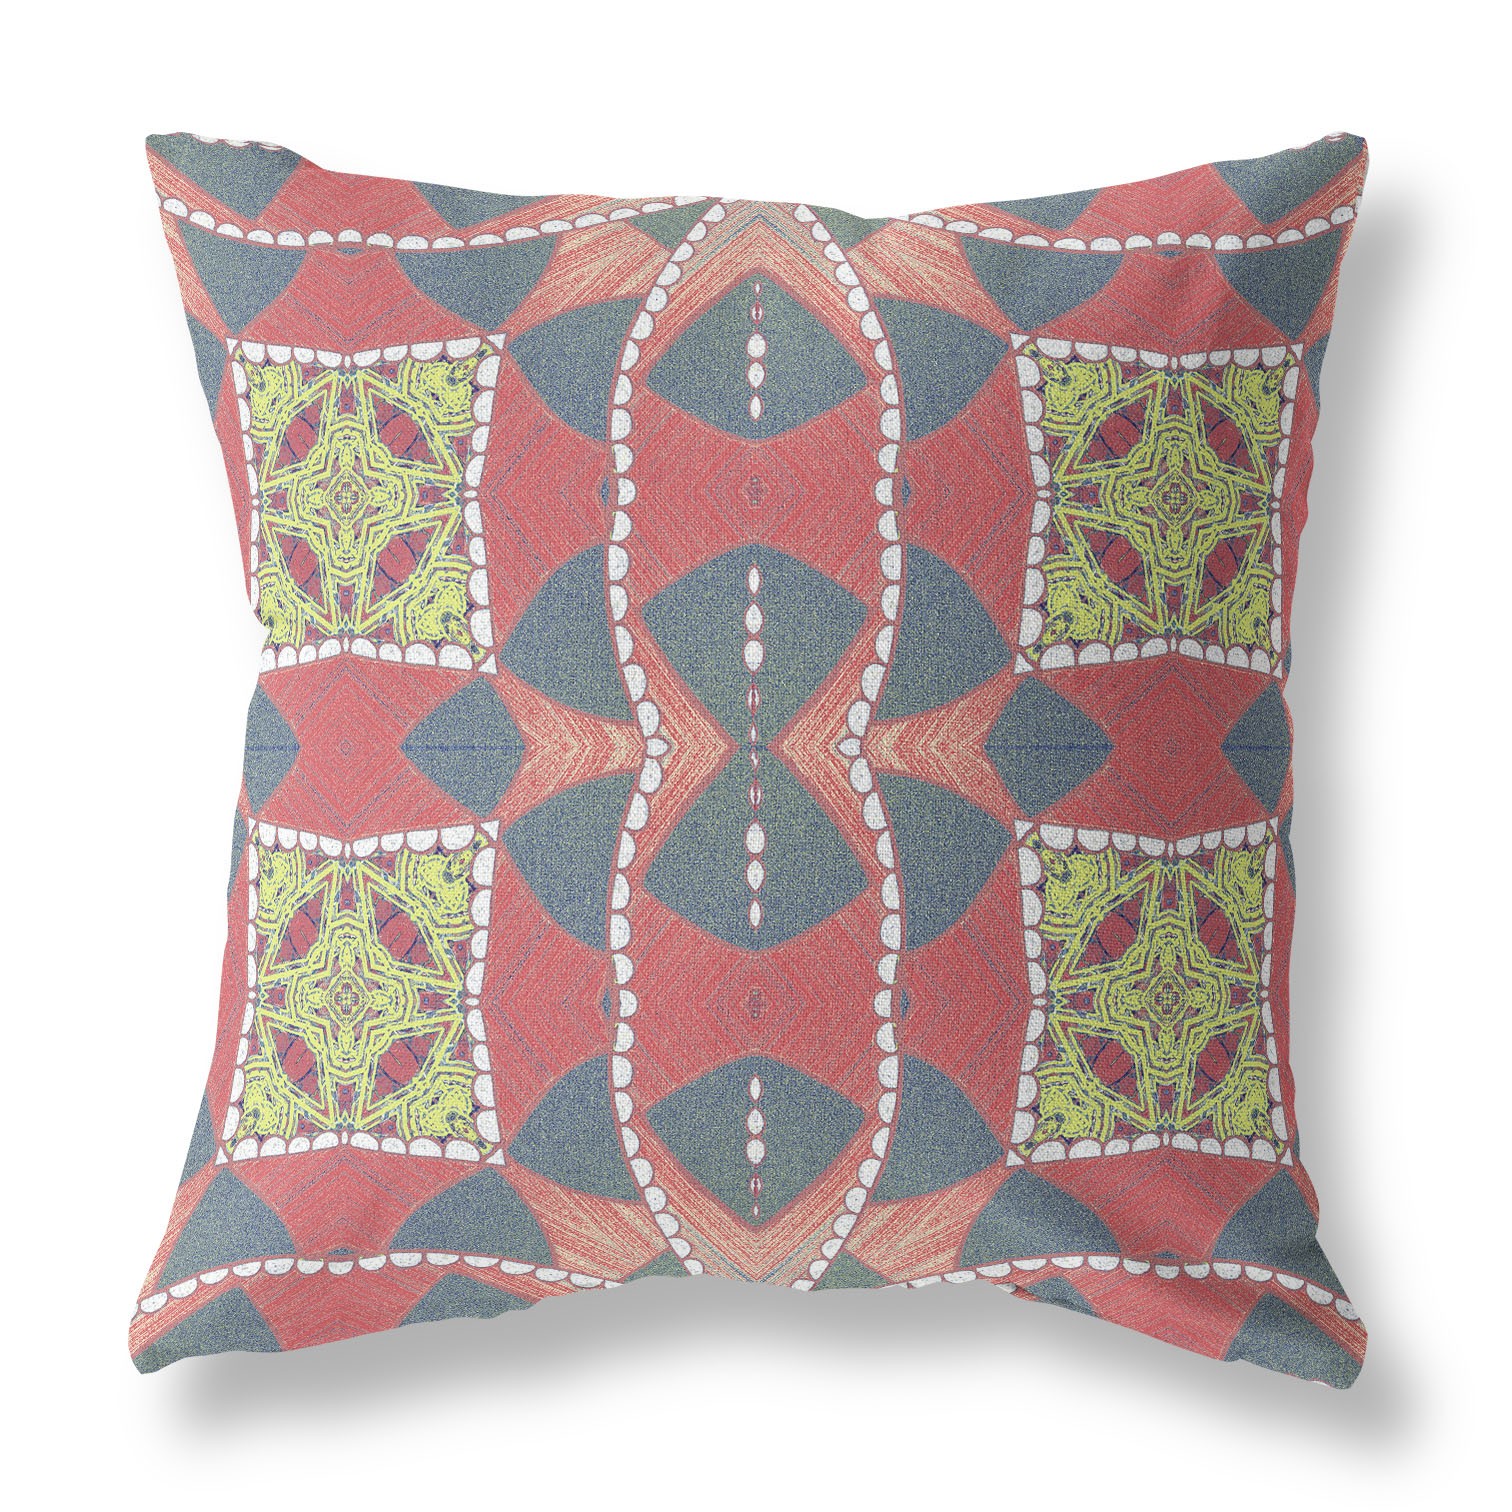 20" Red Gray Cosmic Circle Boho Suede Throw Pillow-411993-1